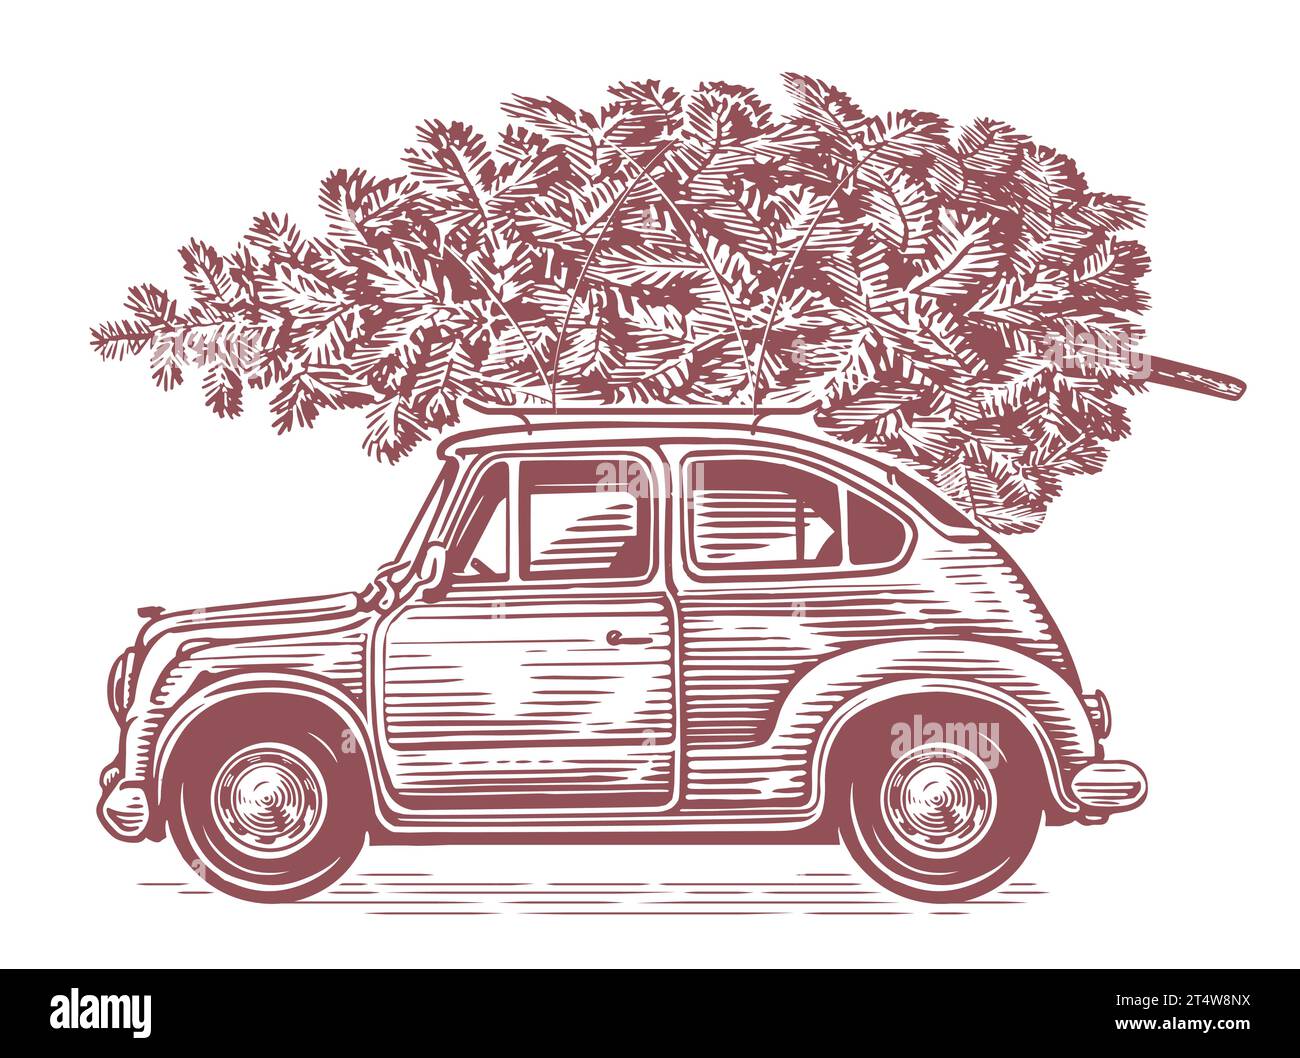 Retro car with Christmas tree on top in sketch art style. Hand drawn vintage vector illustration Stock Vector